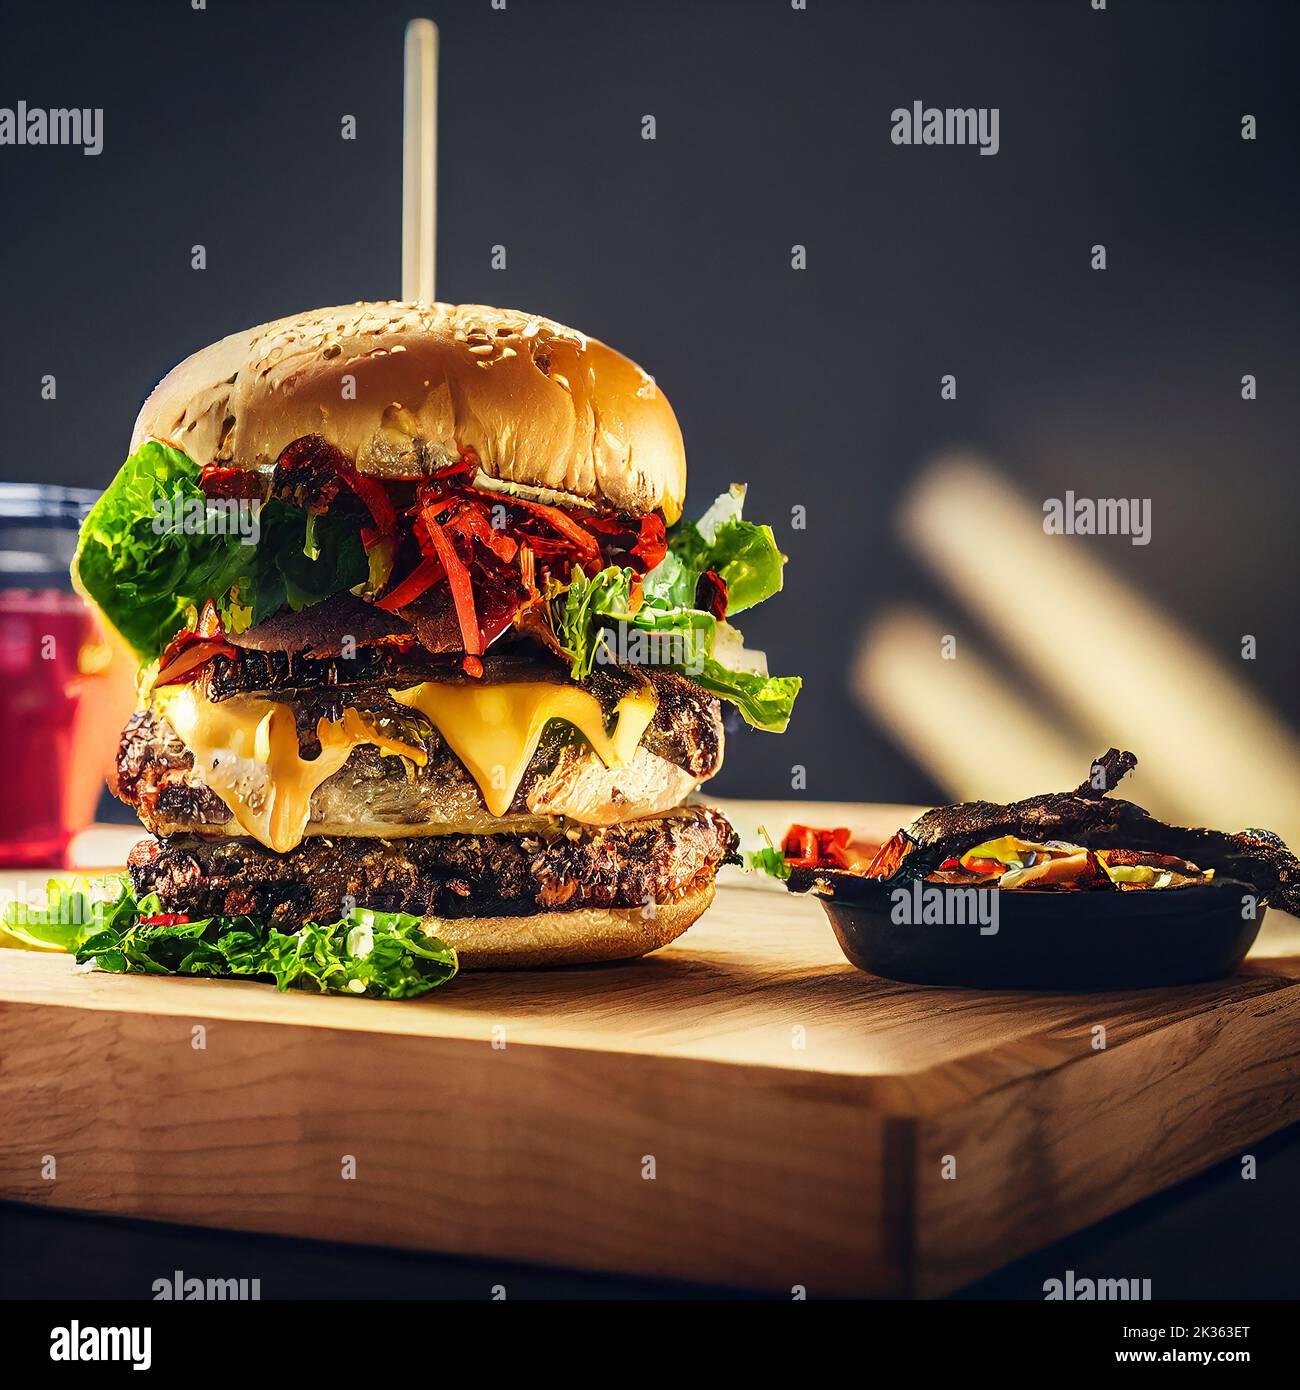 Big American double beef burger on a wooden board with dark background. Cheese, tomato, onion, lettuce, bun, side view, food photography illustration Stock Photo